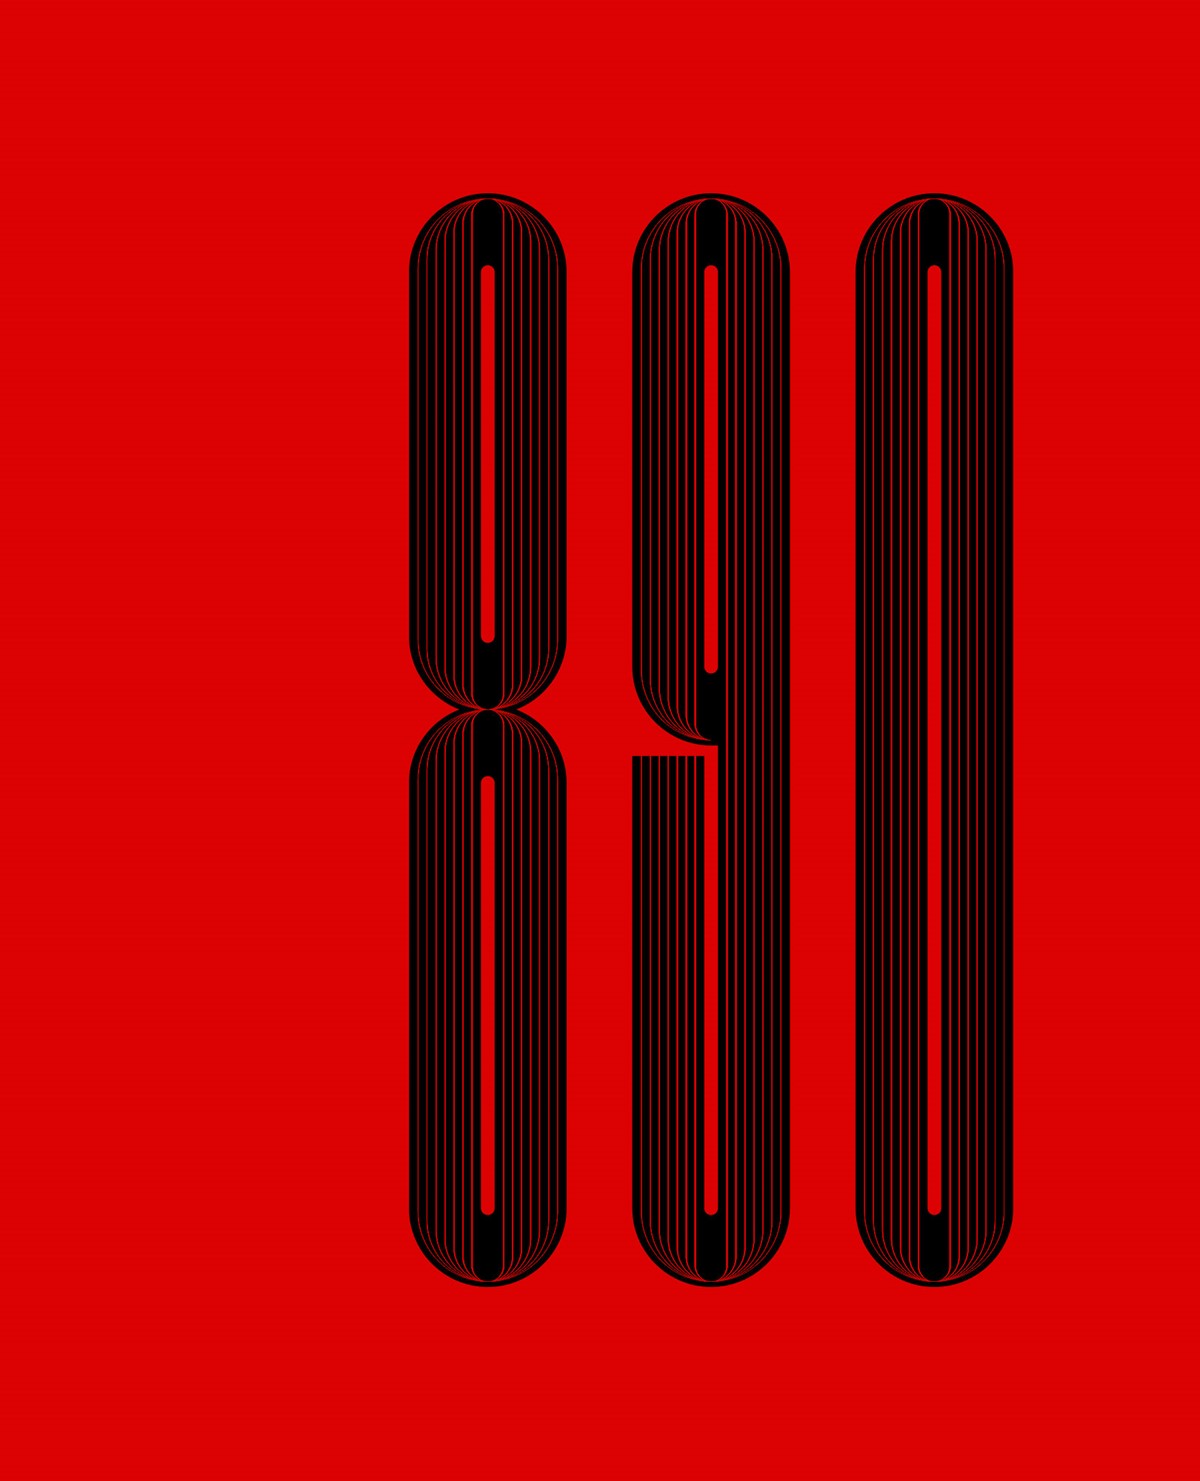 1896. Type experiment. Vertical 8-0. Bespoke typography design by Superfried.